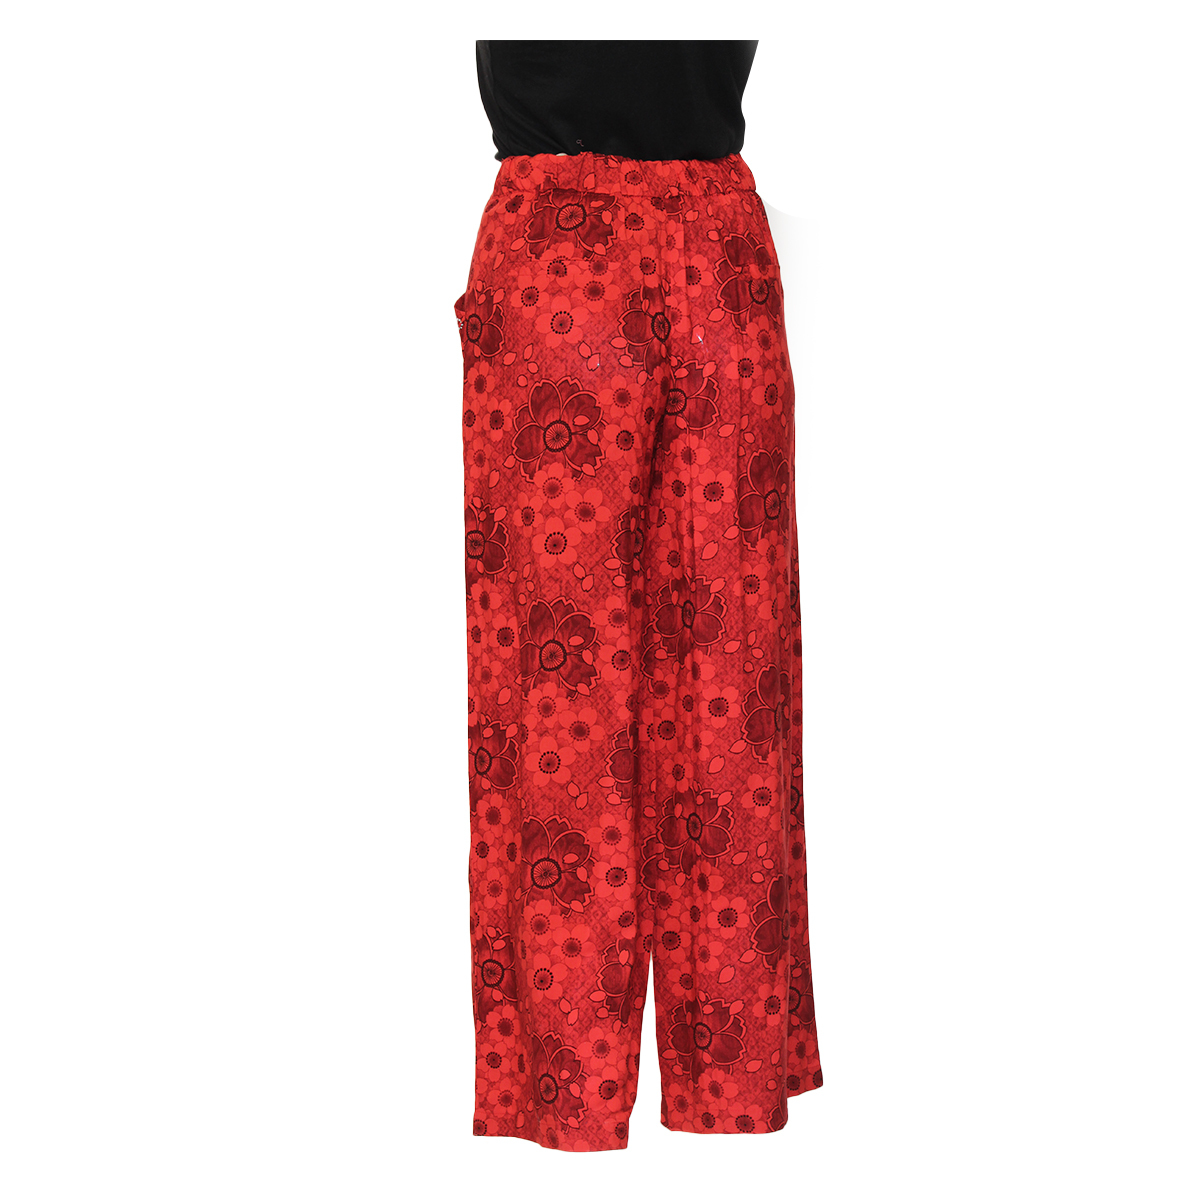 Teen19 Girls Casual Full Length Palazzo/Parallal Pant- Red